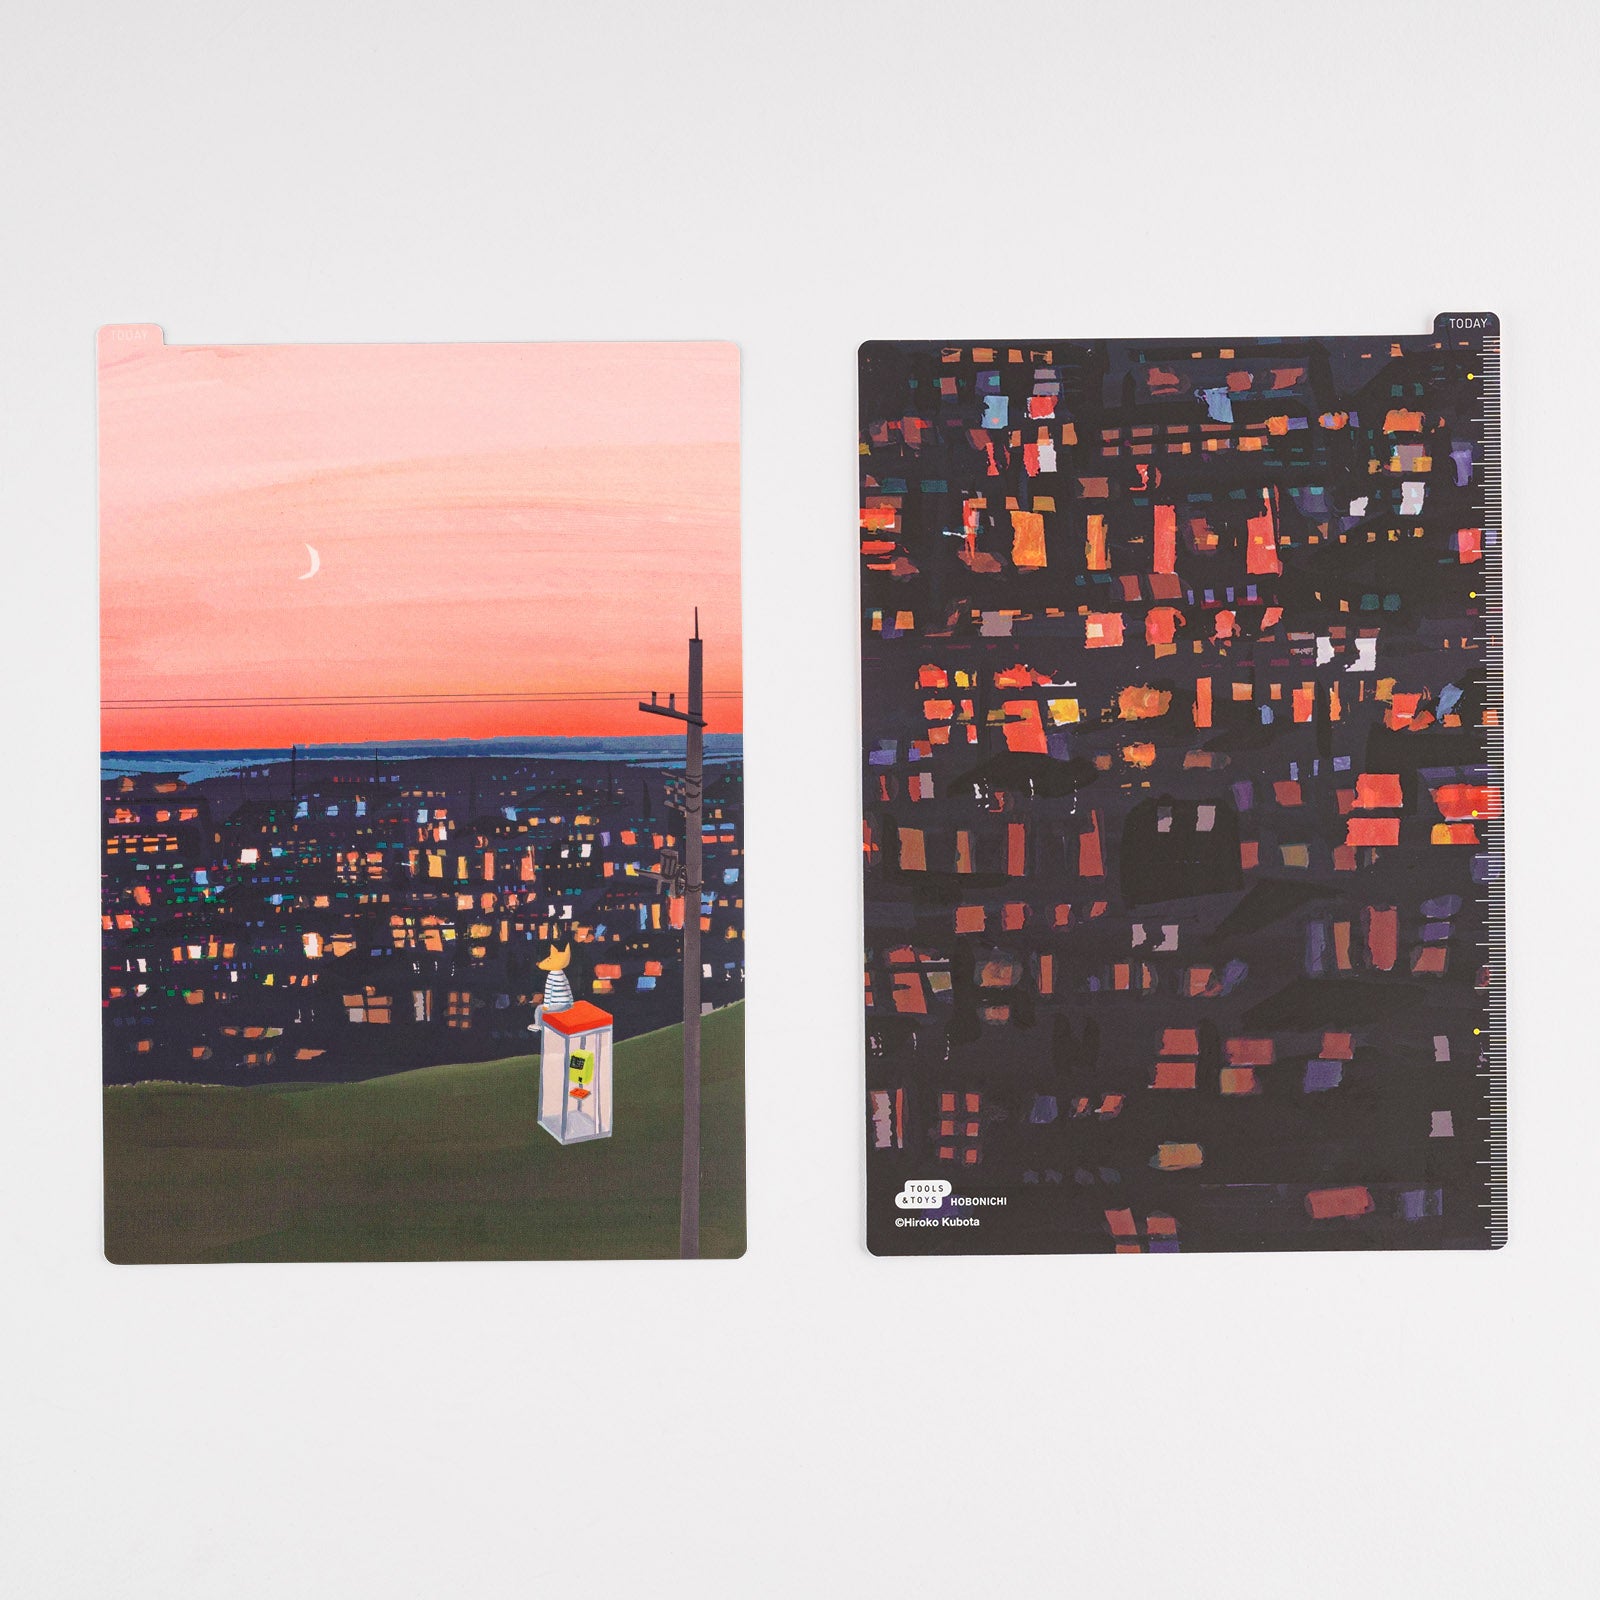 Hobonichi Hiroko Kubota: Pencil Board for A5 Size (Count the Lights) This pencil board features artwork by Hiroko Kubota.  The Hobonichi pencil boards are designed to use underneath the page you are writing on to keep your writing experience even smoother.